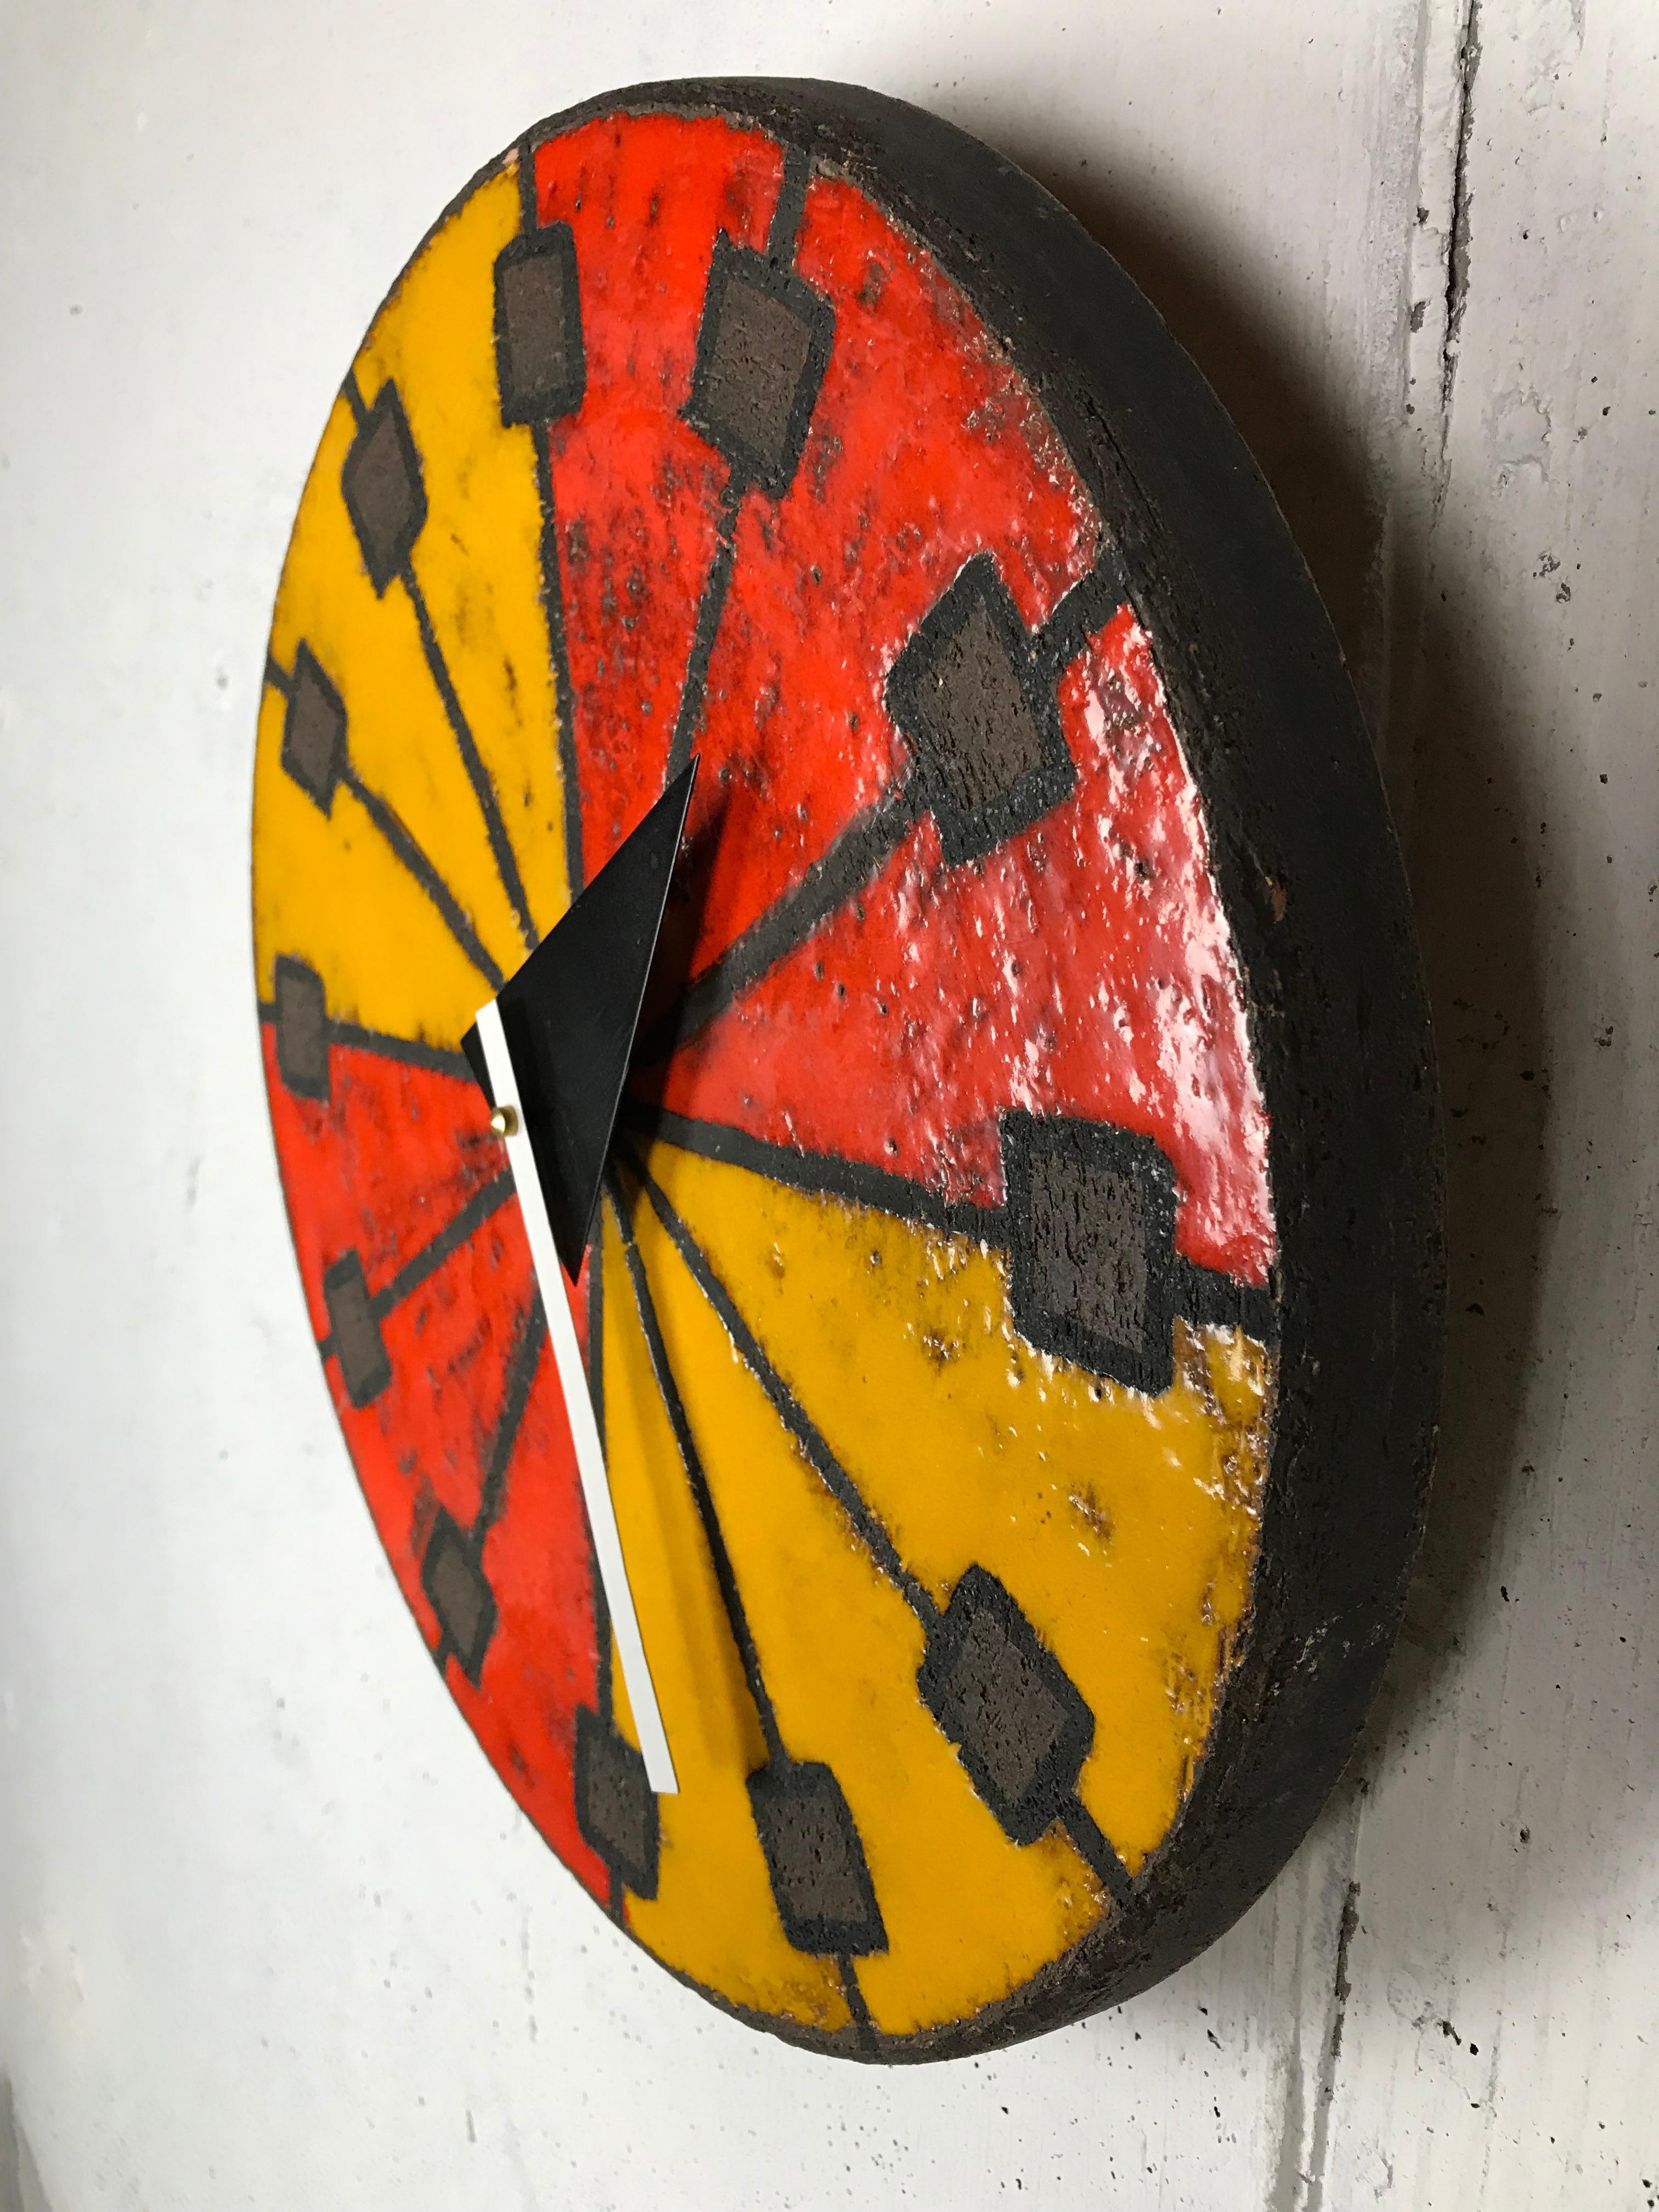 Eye-catching modernist Italian ceramic wall clock by Bitossi (Italian potter) manufactured by Howard Miller using hands designed by Goerge Nelson (American designer). This desirable glaze has brilliant red and orange colors and a sgraffito technique